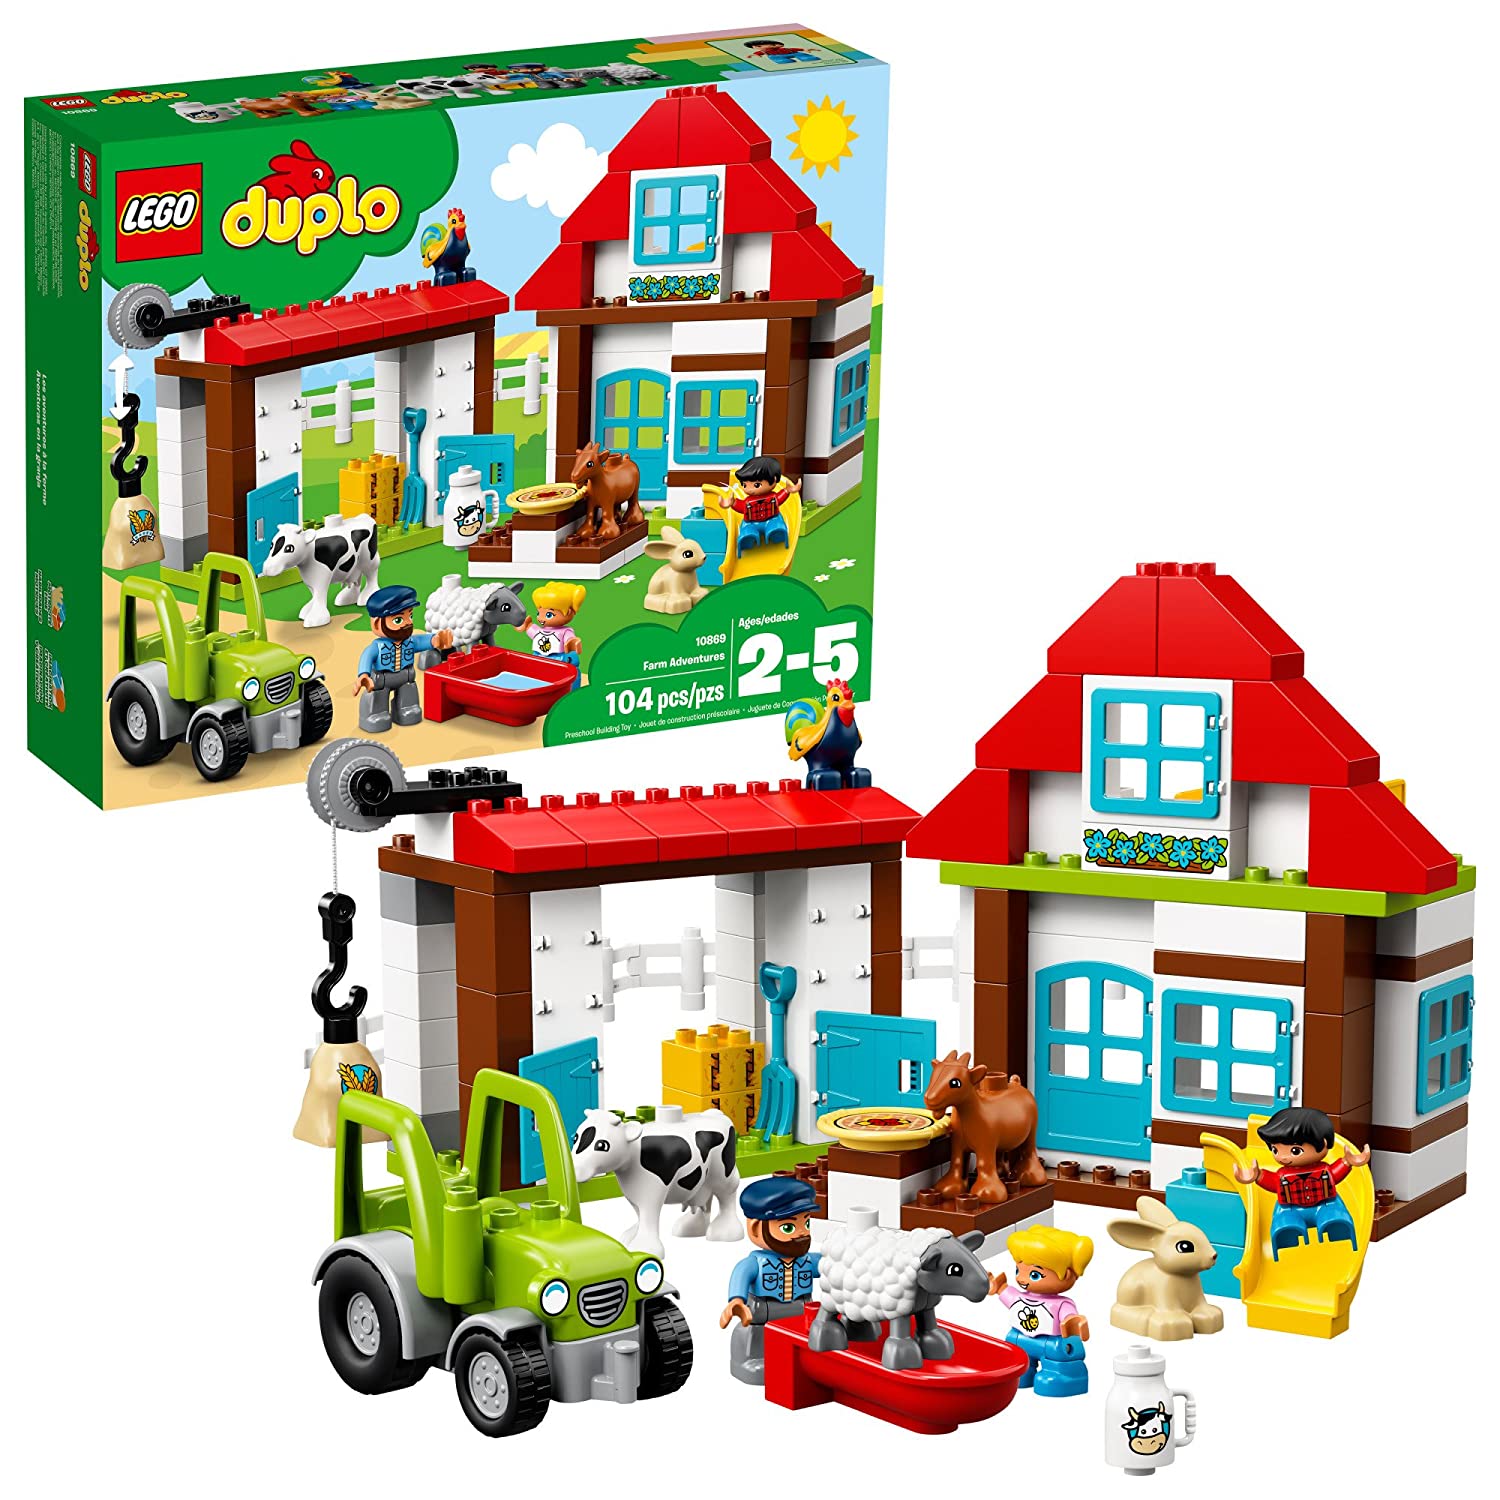 Top 9 Best Lego Duplo Sets Reviews in 2023 5